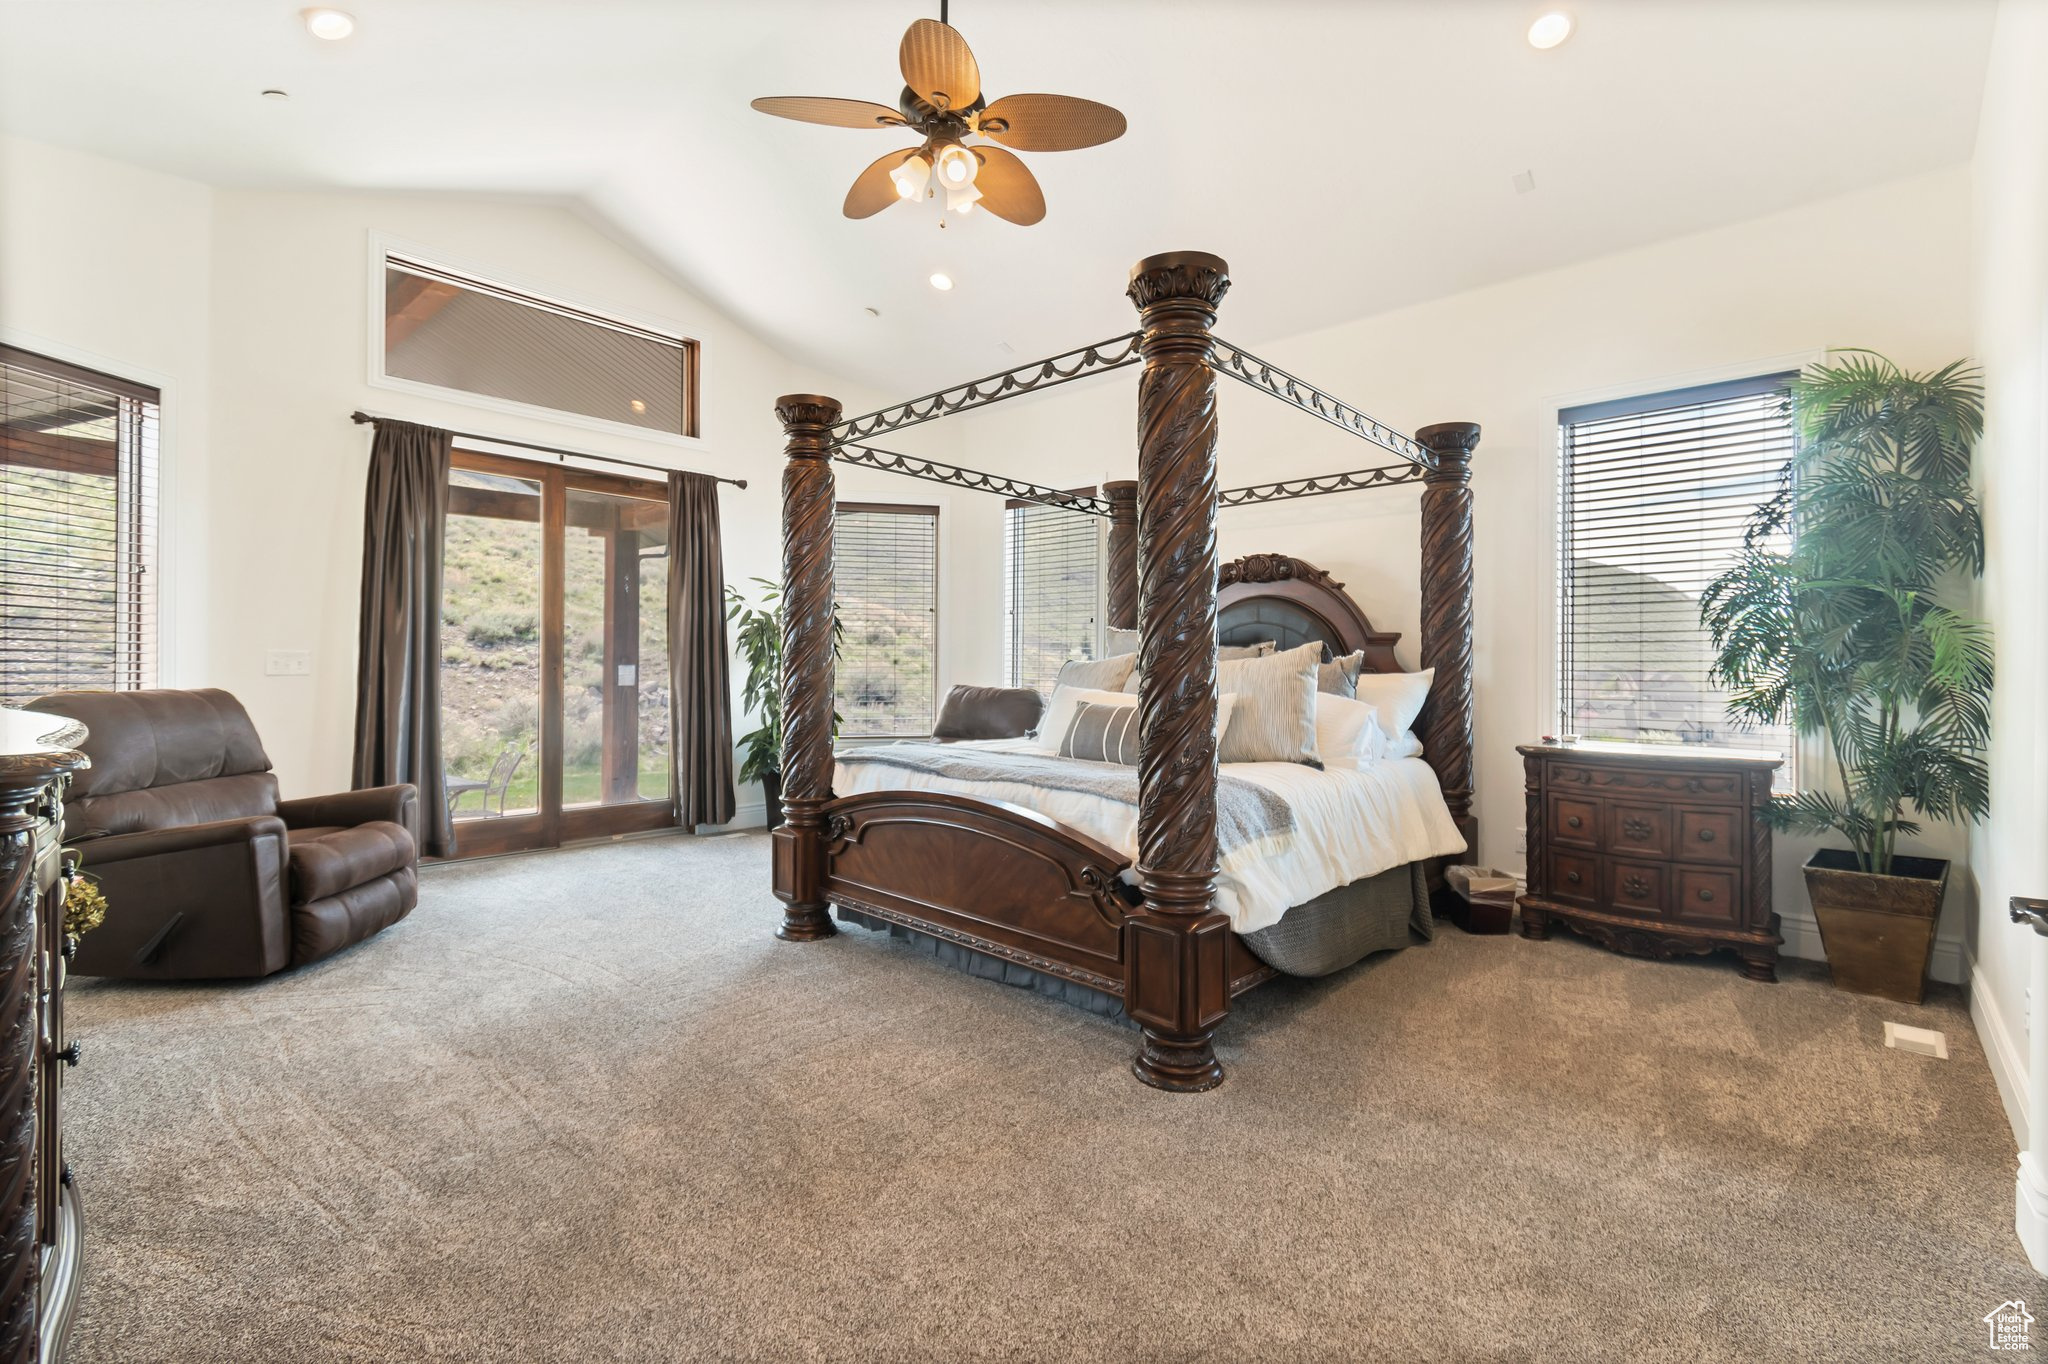 Bedroom with high vaulted ceiling, ceiling fan, access to exterior, and carpet flooring